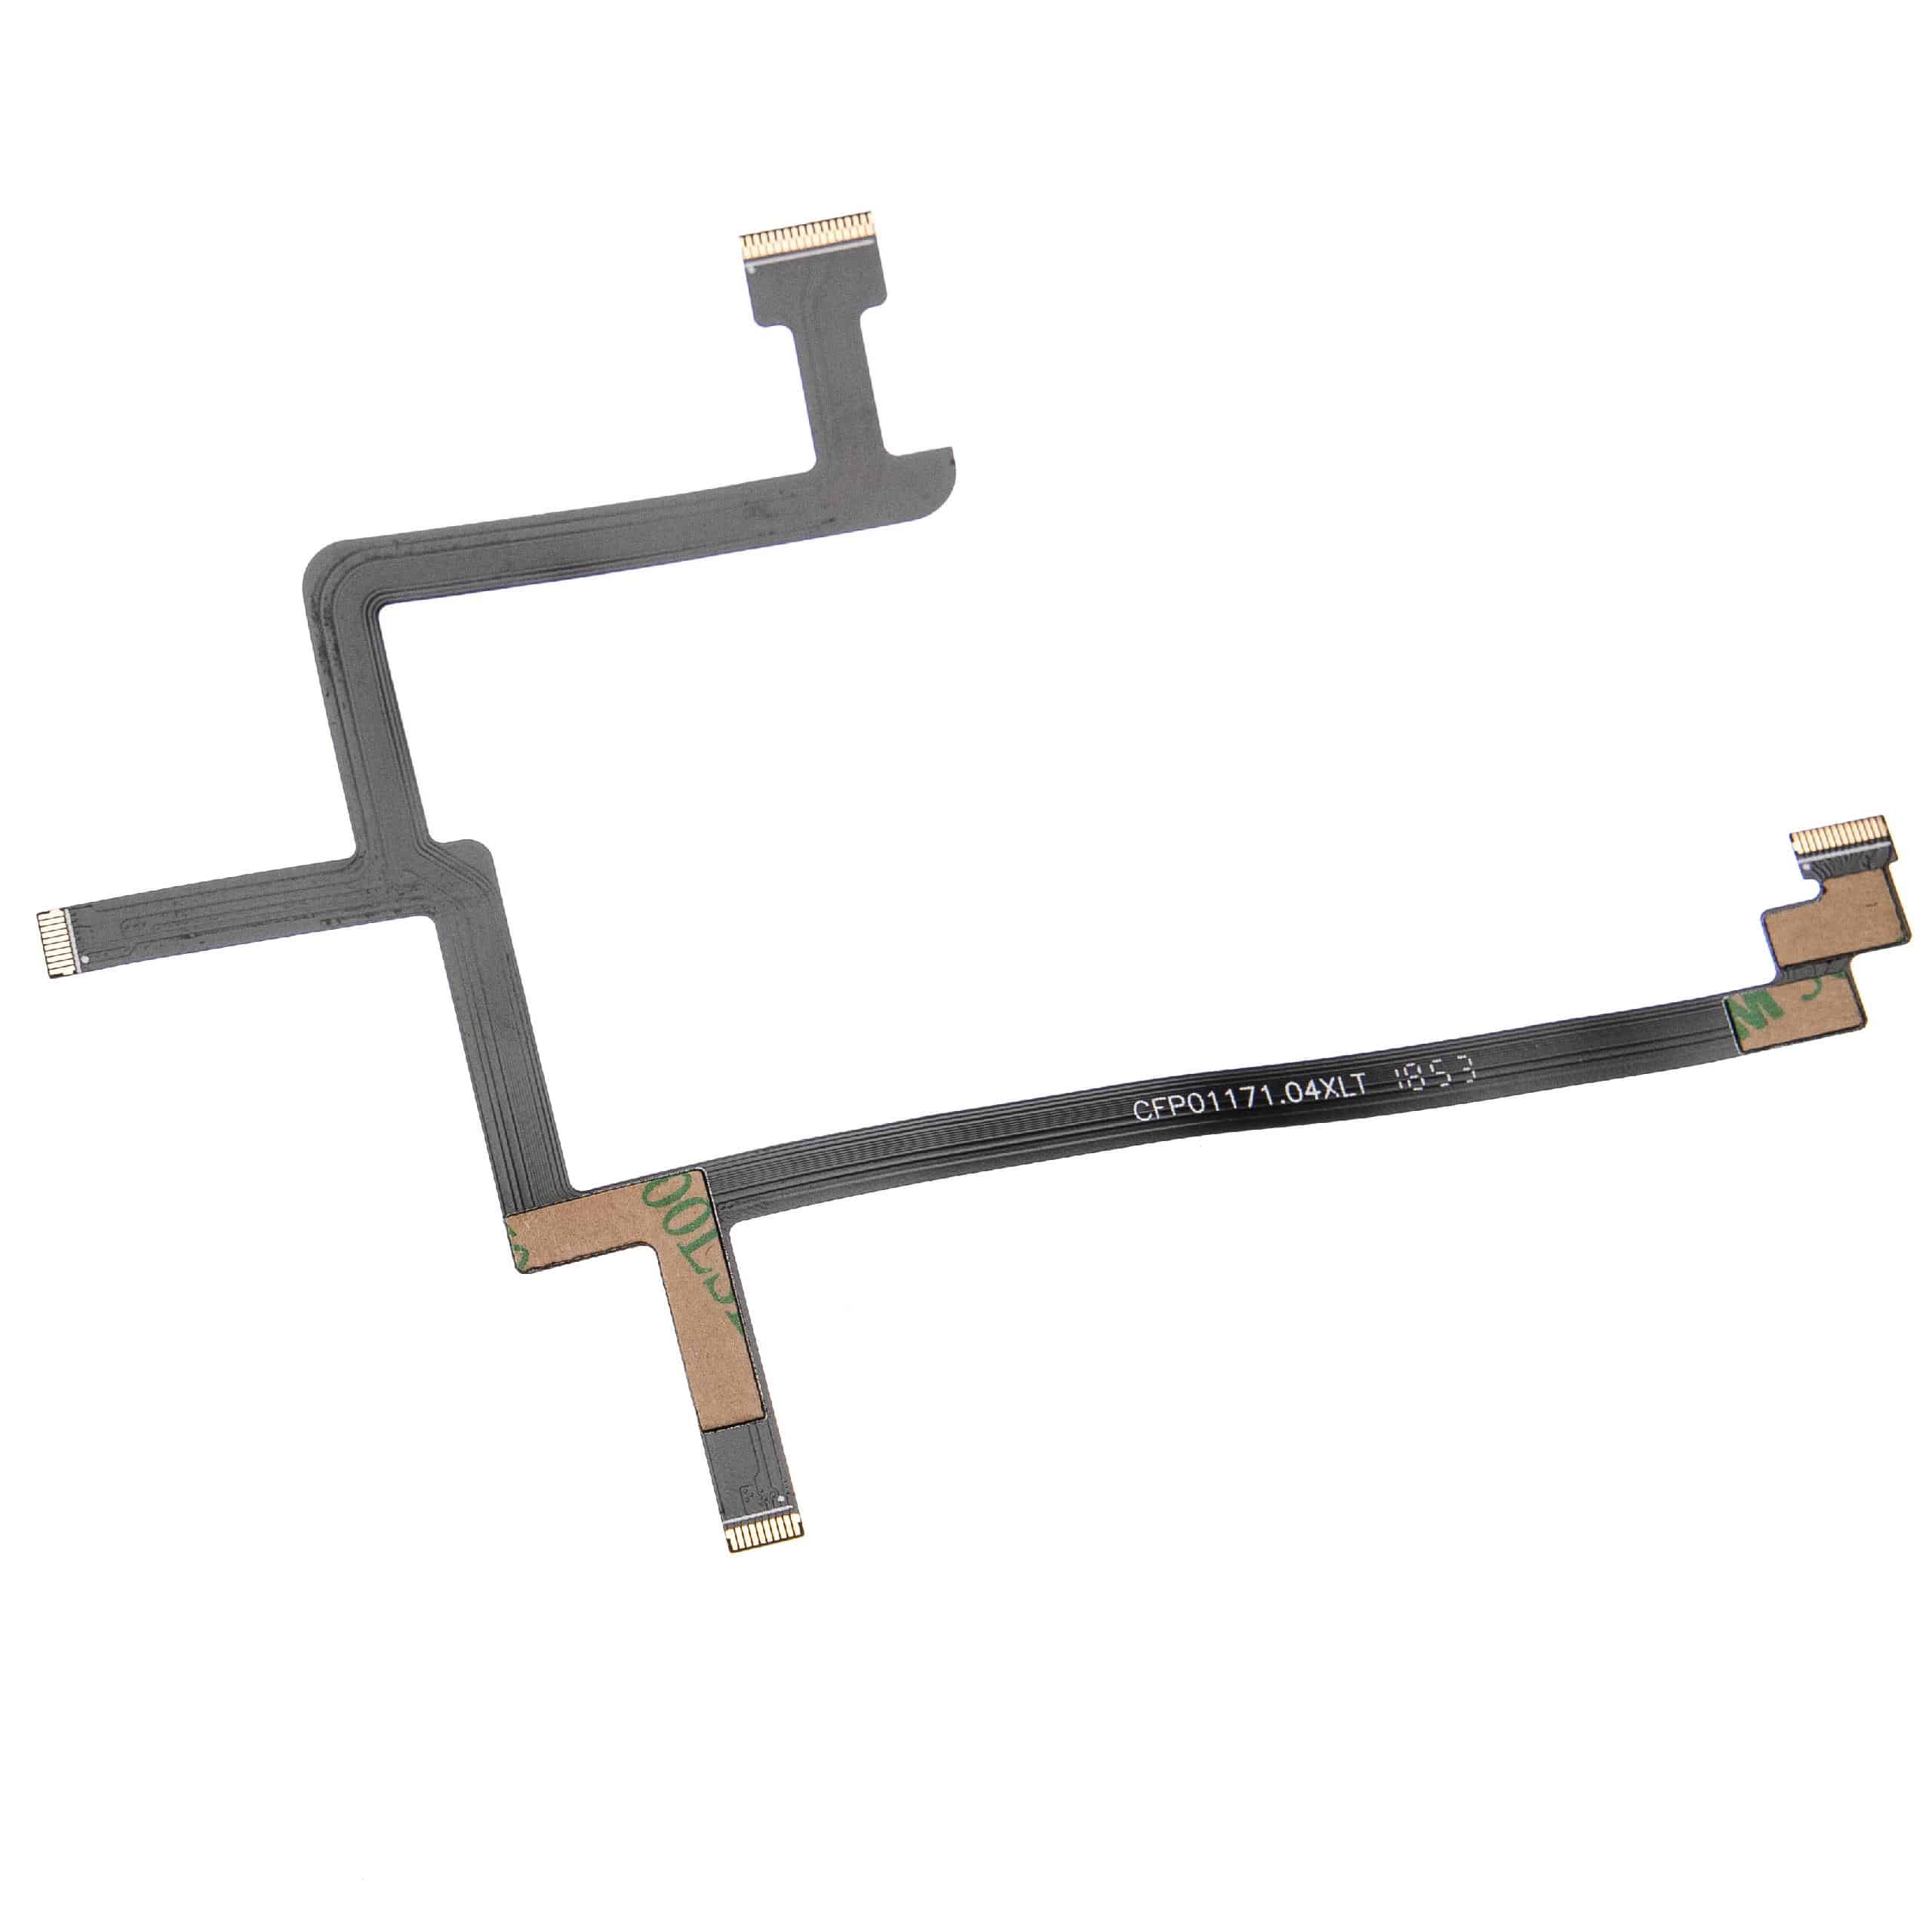 Ribbon Flex Cable suitable for DJI Phantom 3 Standard Drone, Gimbal Part No 85 - with double-sided tape